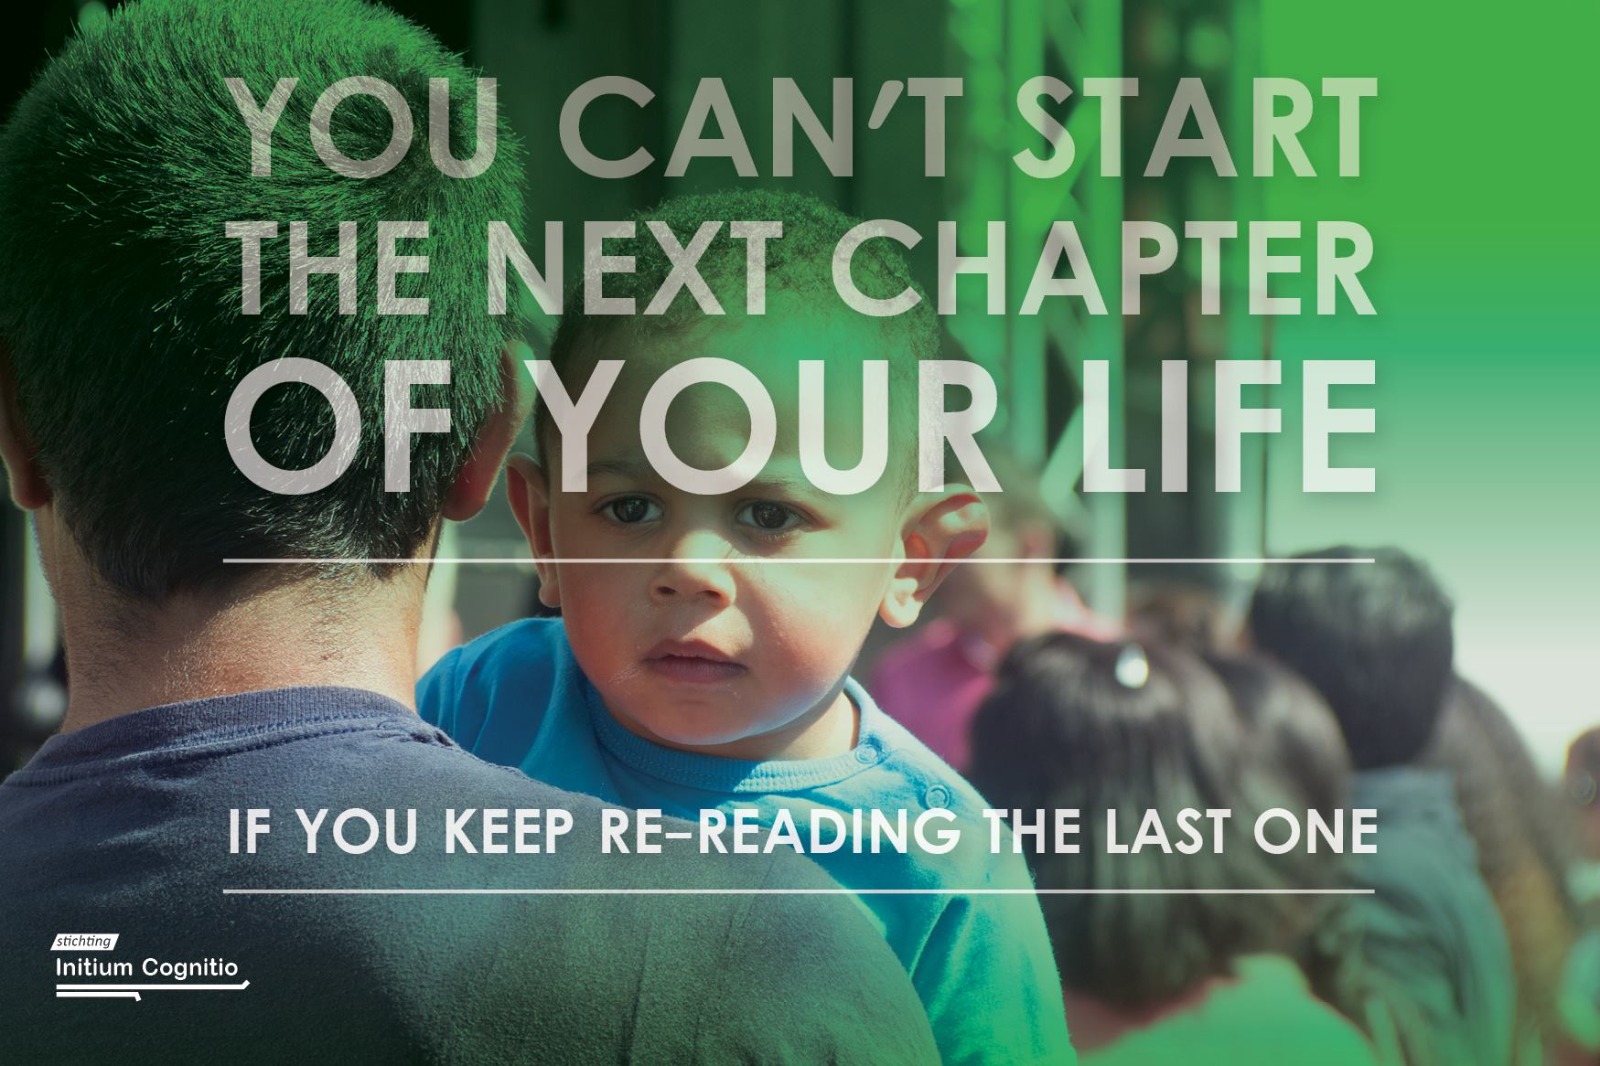 stanley-ter-haar-quote-you-cant-start-the-next-chapter-of-your-life-grafisch-ontwerp